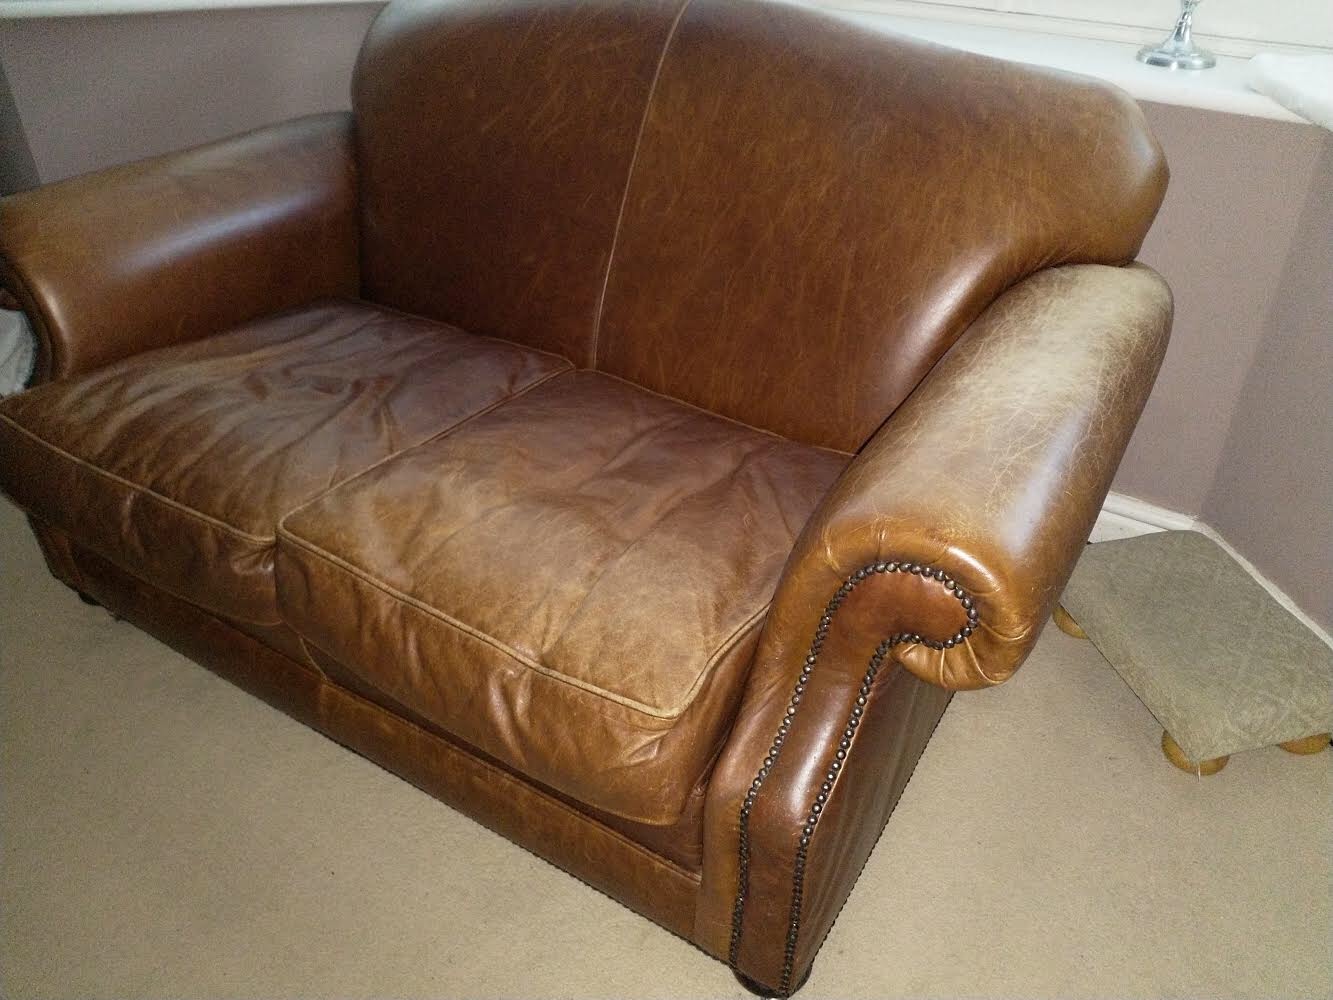 Fading Leather Pro Rers, Restoring Sun Damaged Leather Couch